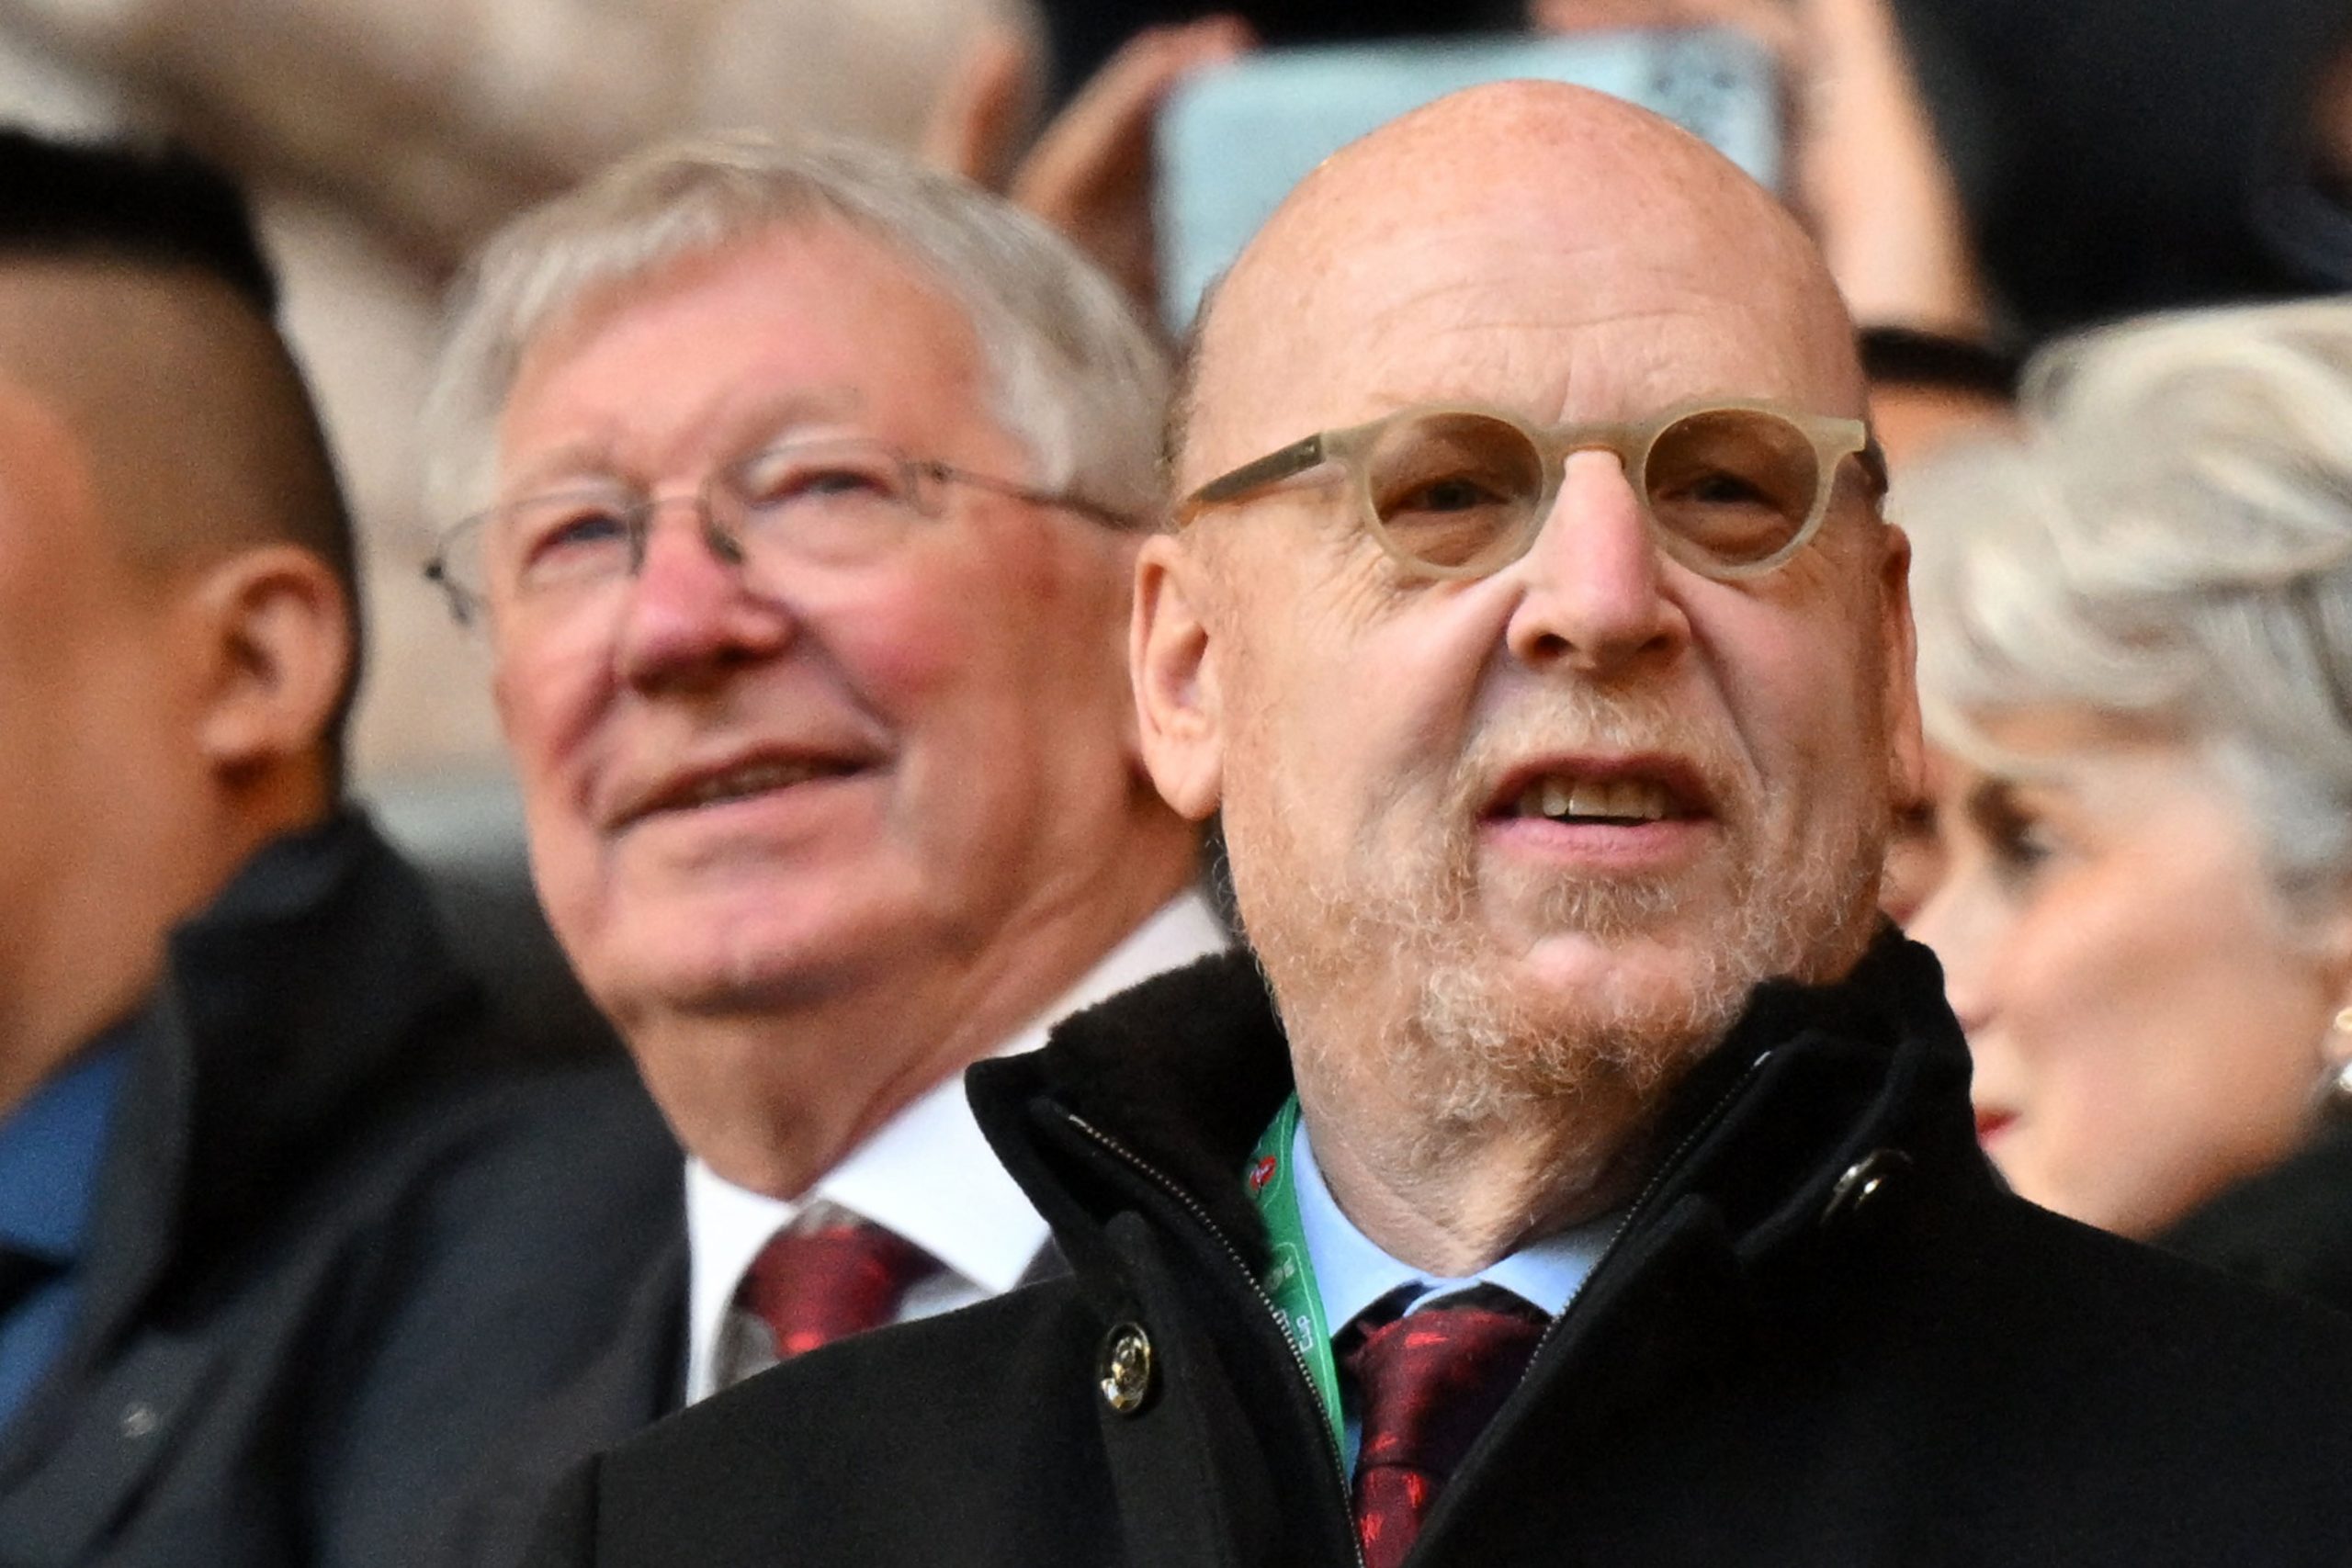 Manchester United owner Avram Glazer recently met a world-renowned Pakistani cricketer.